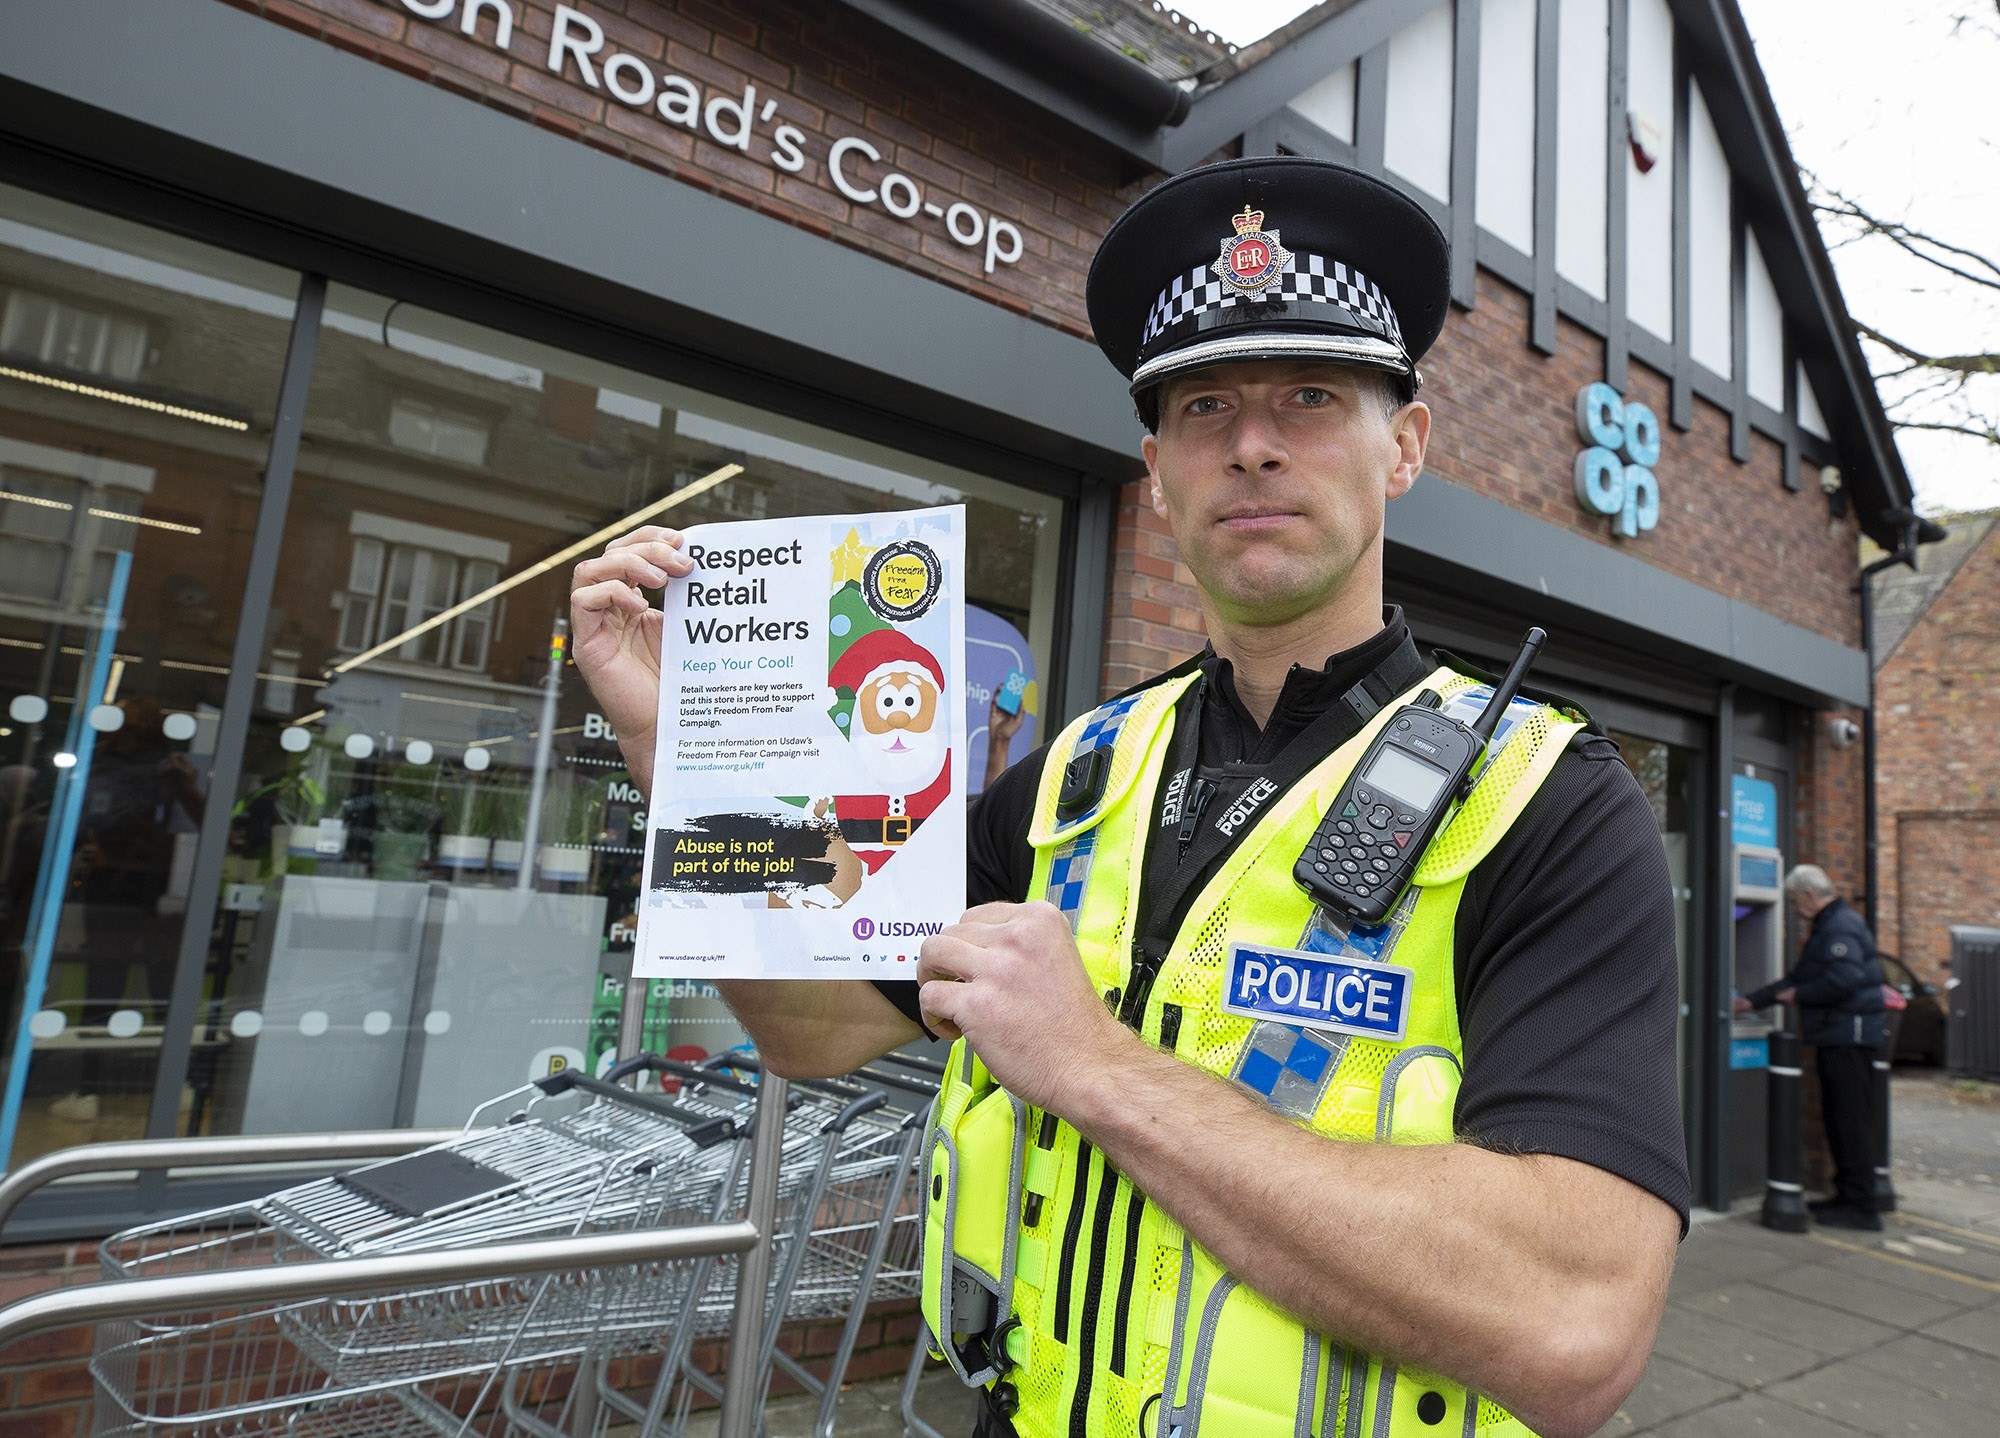 Police are backing the Shop Kind campaign